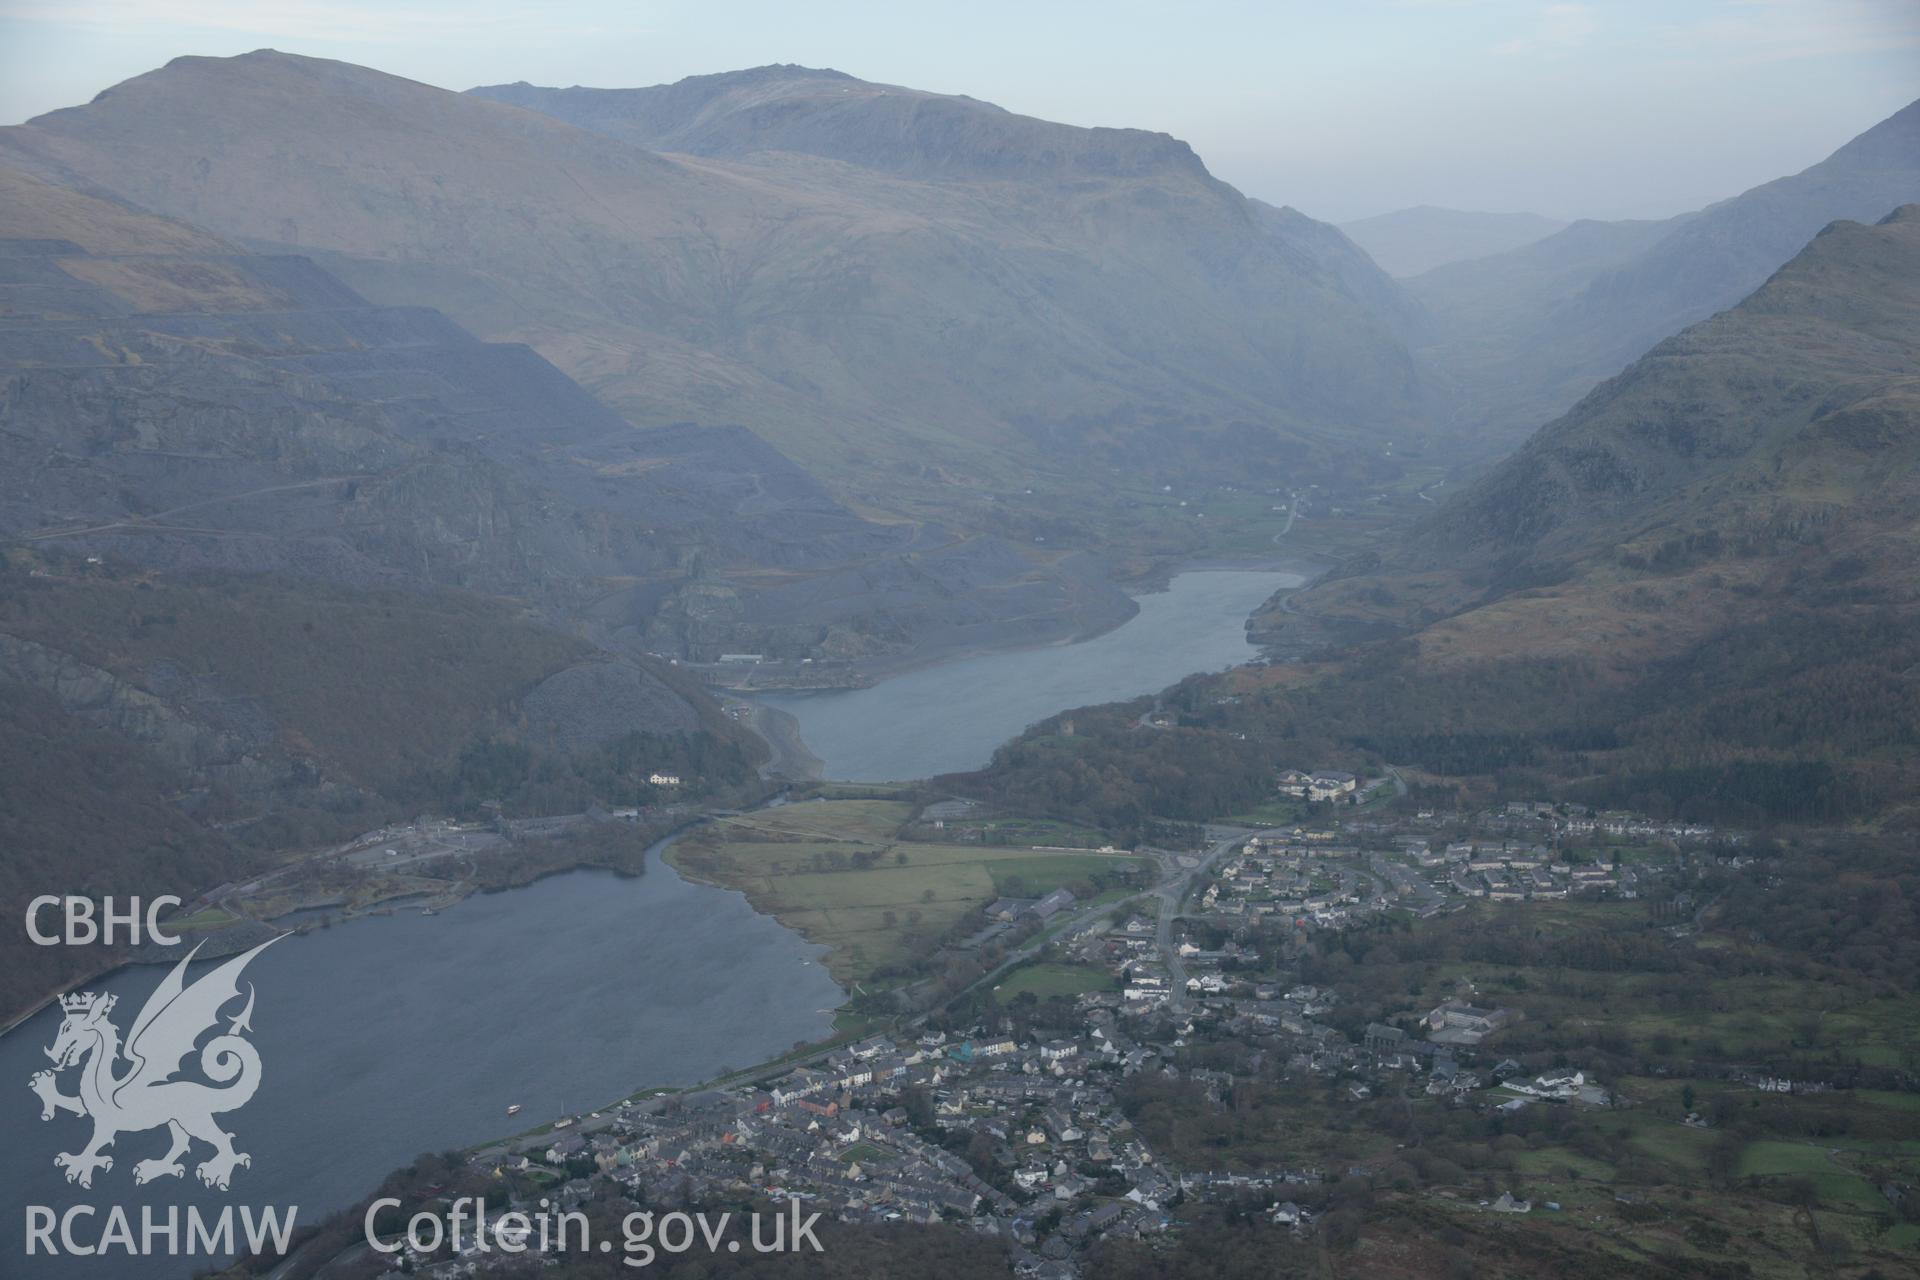 RCAHMW digital colour oblique photograph of Llanberis from the west. Taken on 20/03/2005 by T.G. Driver.